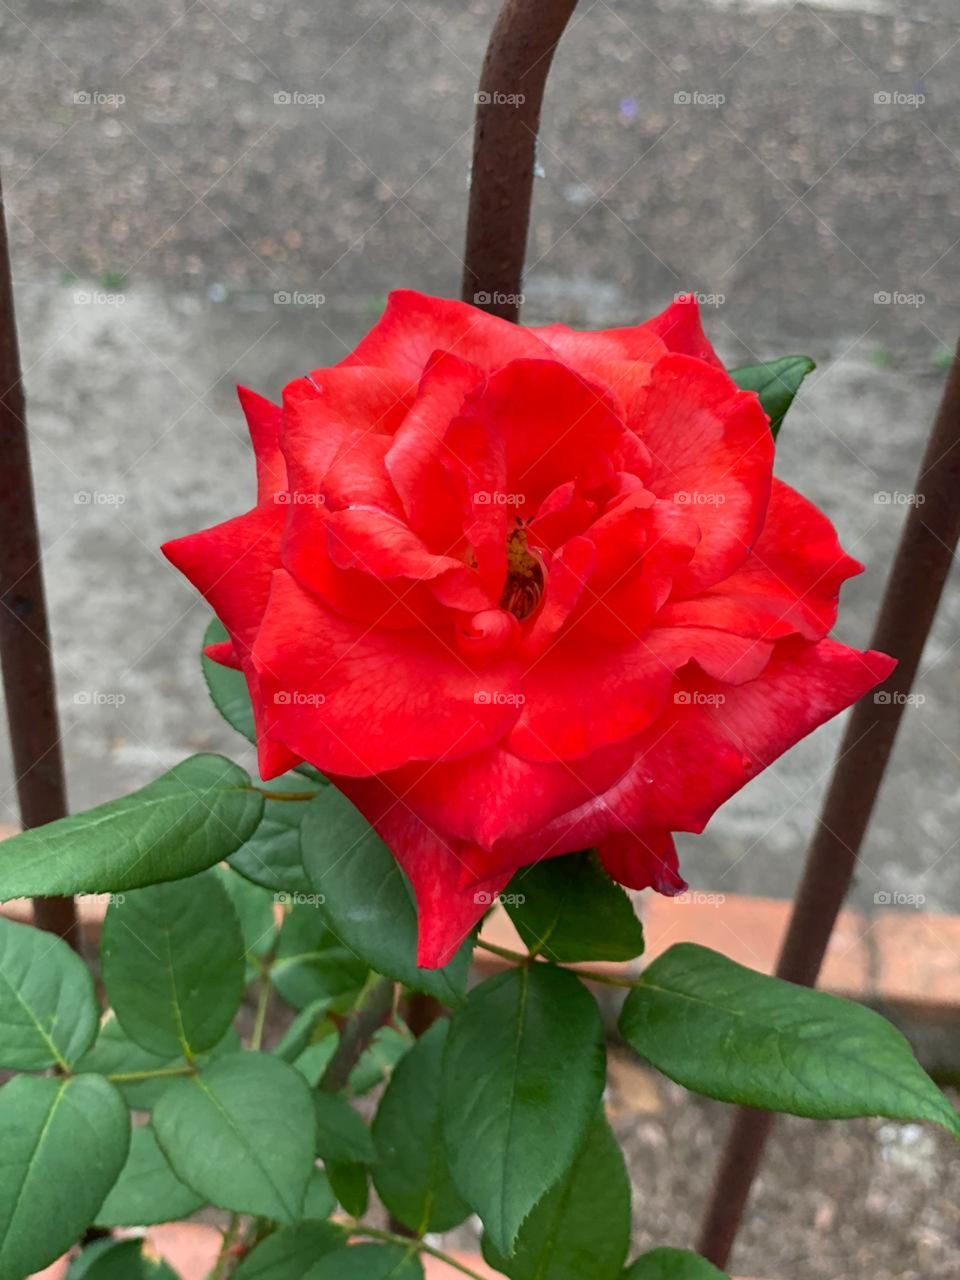 Nature has many tricks... who does not fall in love by this rose?